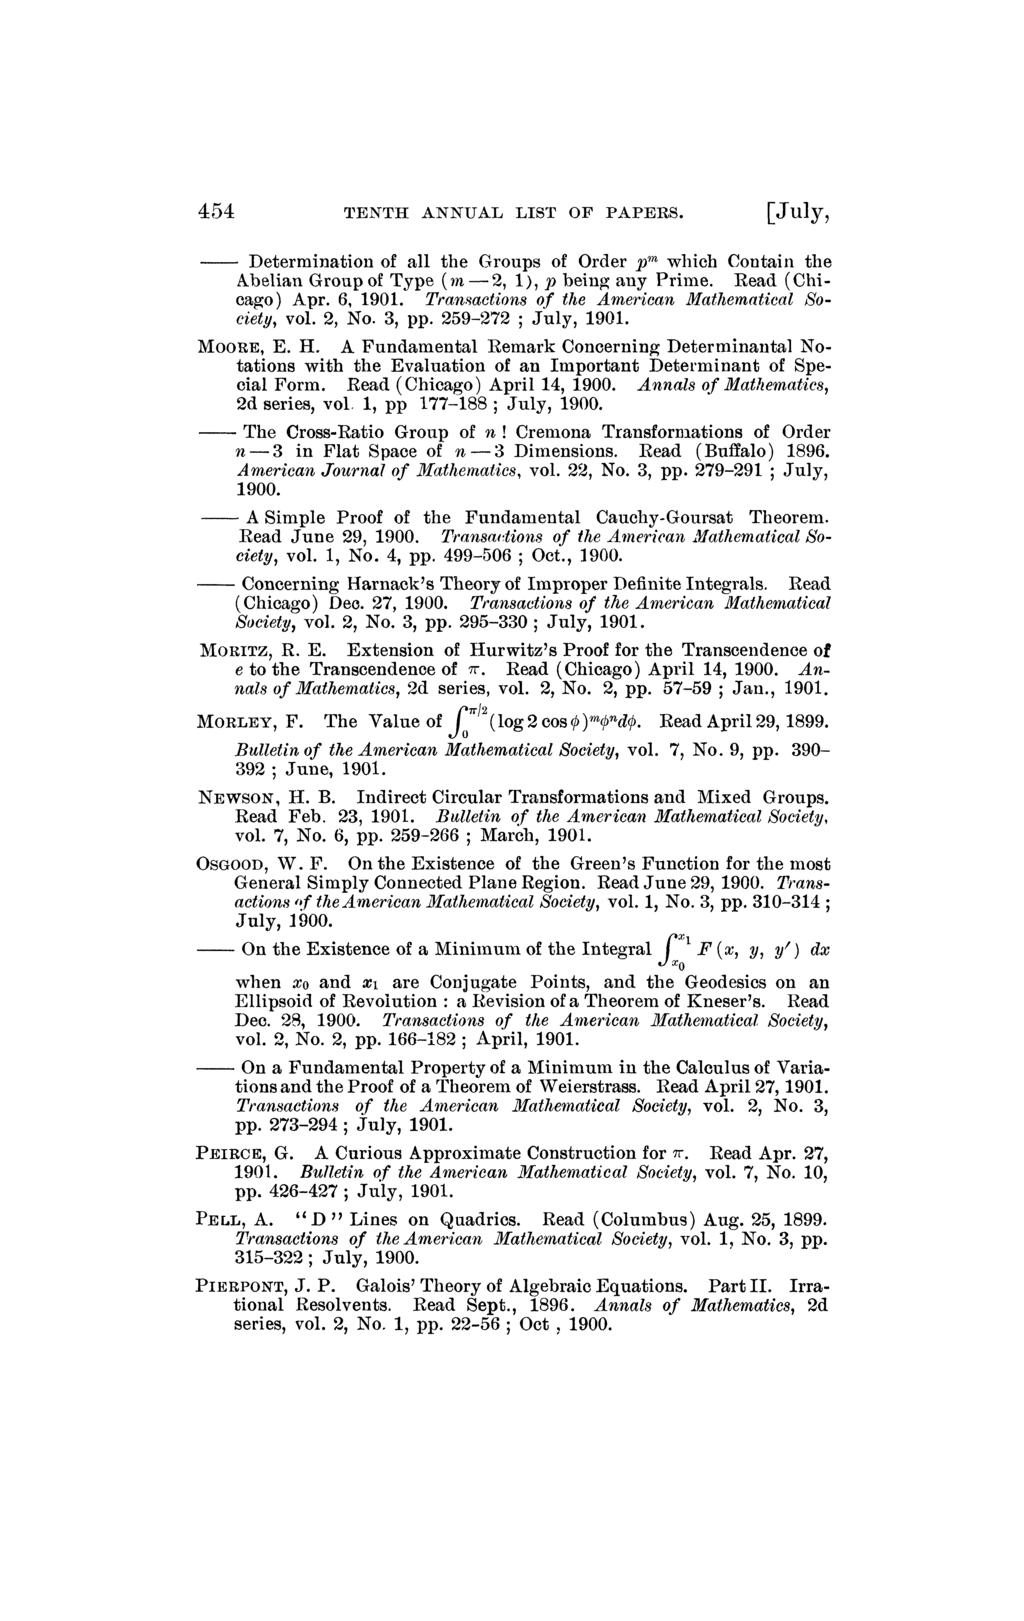 454 TENTH ANNUAL LIST OF PAPERS. [J u ty> Determination of all the Groups of Order p m which Contain the Abelian Group of Type (wi 2, 1), p being any Prime. Read (Chicago) Apr.